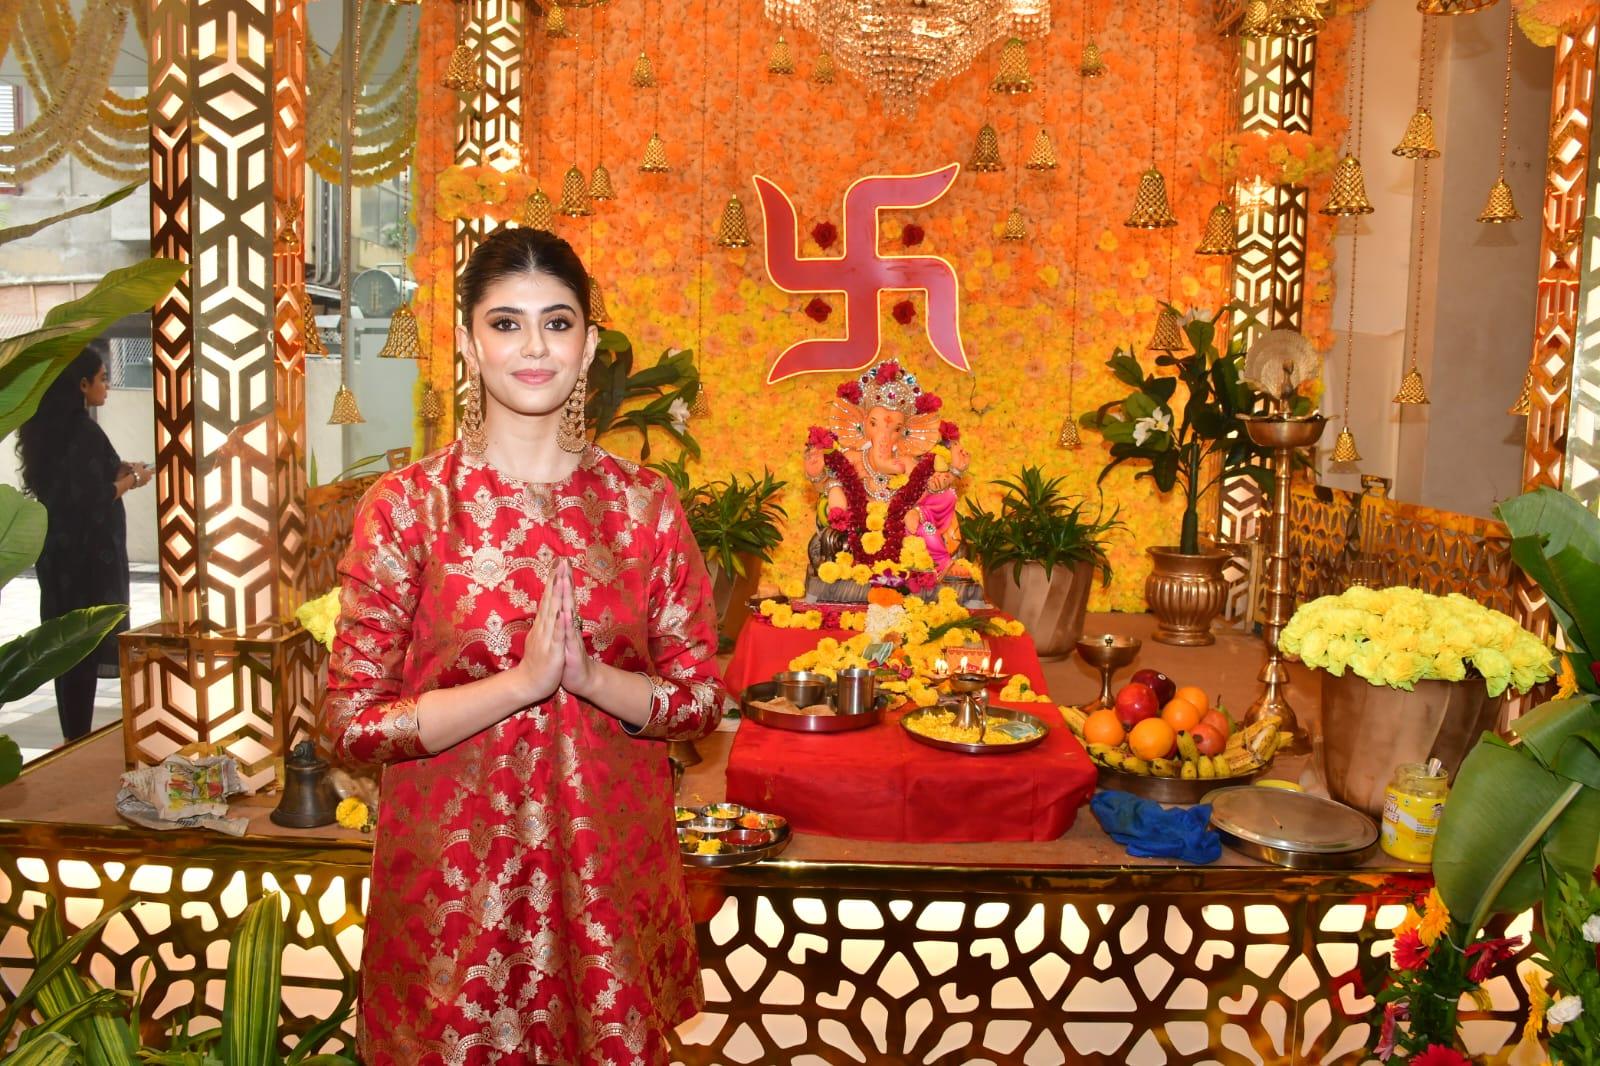 Sanjana Sanghi also reached T-series to seek blessings